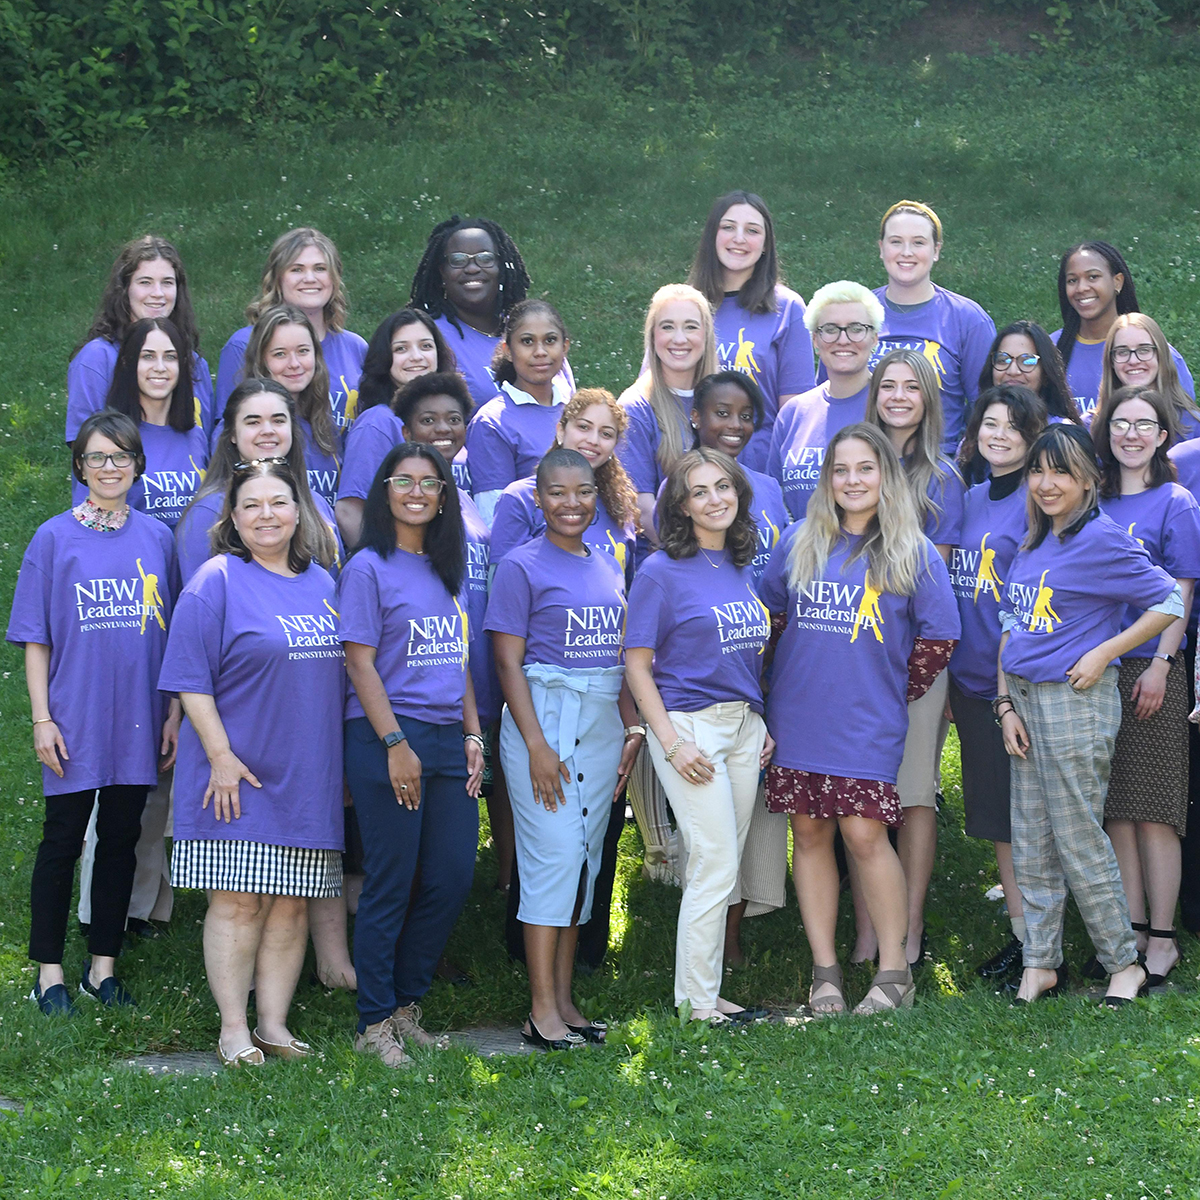 Photo of a group of women in purple NEW Leadership t-shirts posing for a photo outside